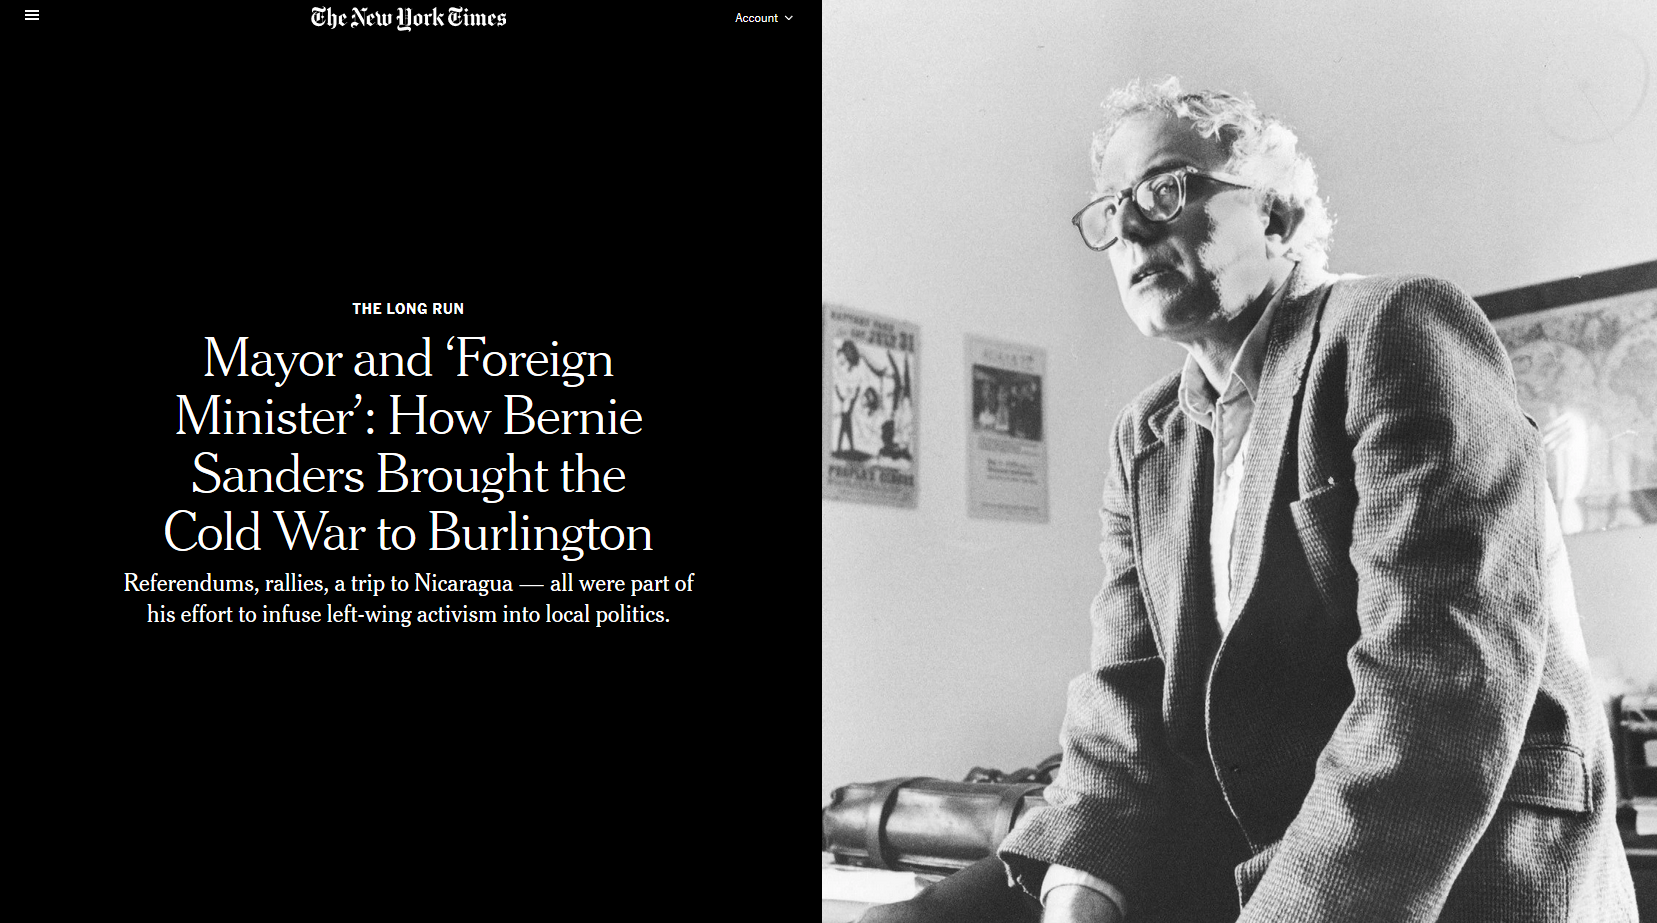 NYT: Mayor and ‘Foreign Minister’: How Bernie Sanders Brought the Cold War to Burlington